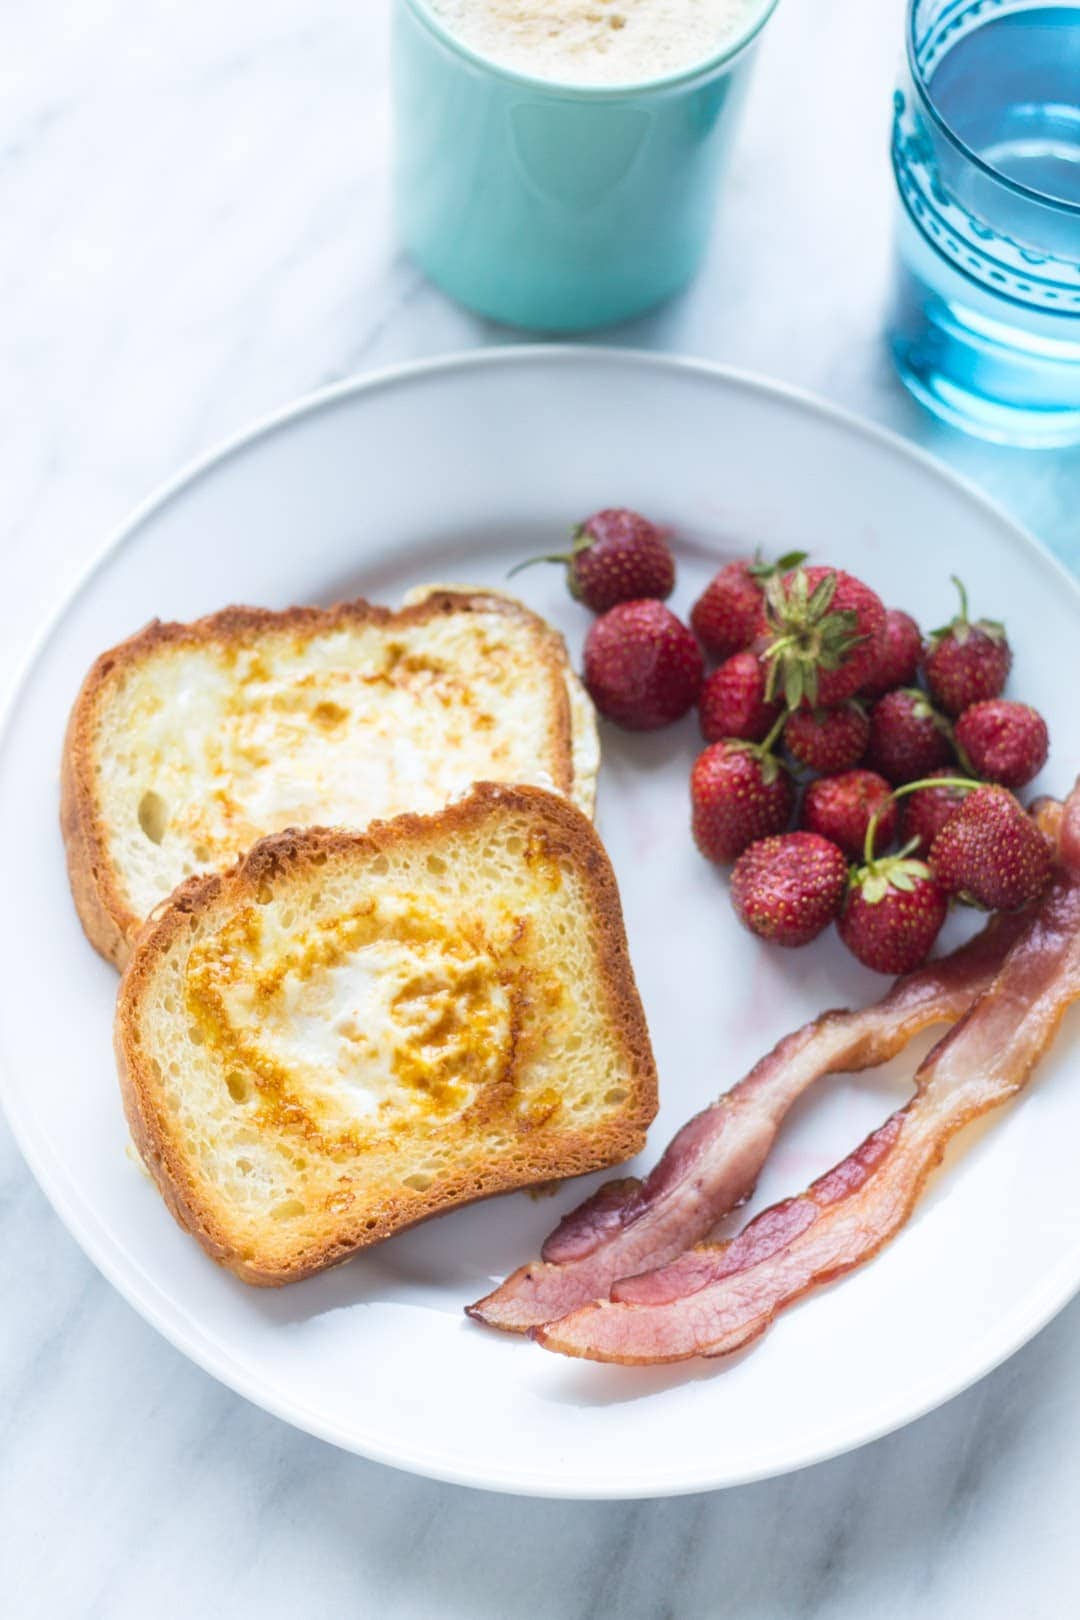 Plate of low FODMAP toad in a hole (toast with a cooked egg in the center), slices of bacon and strawberries